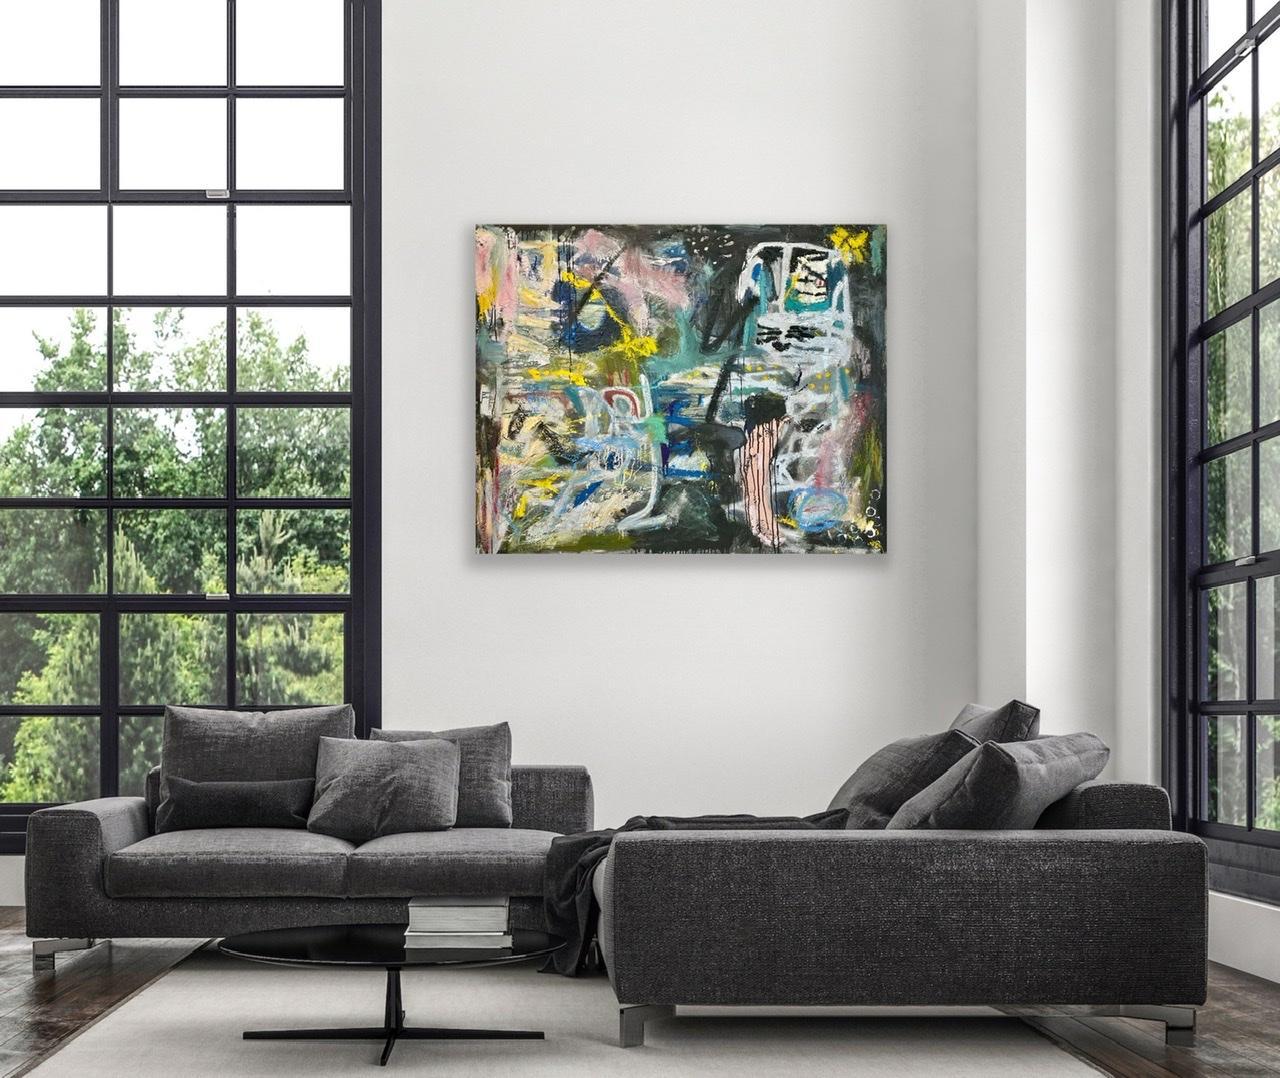 King of the Jungle - Gray Abstract Painting by Jordan Barker